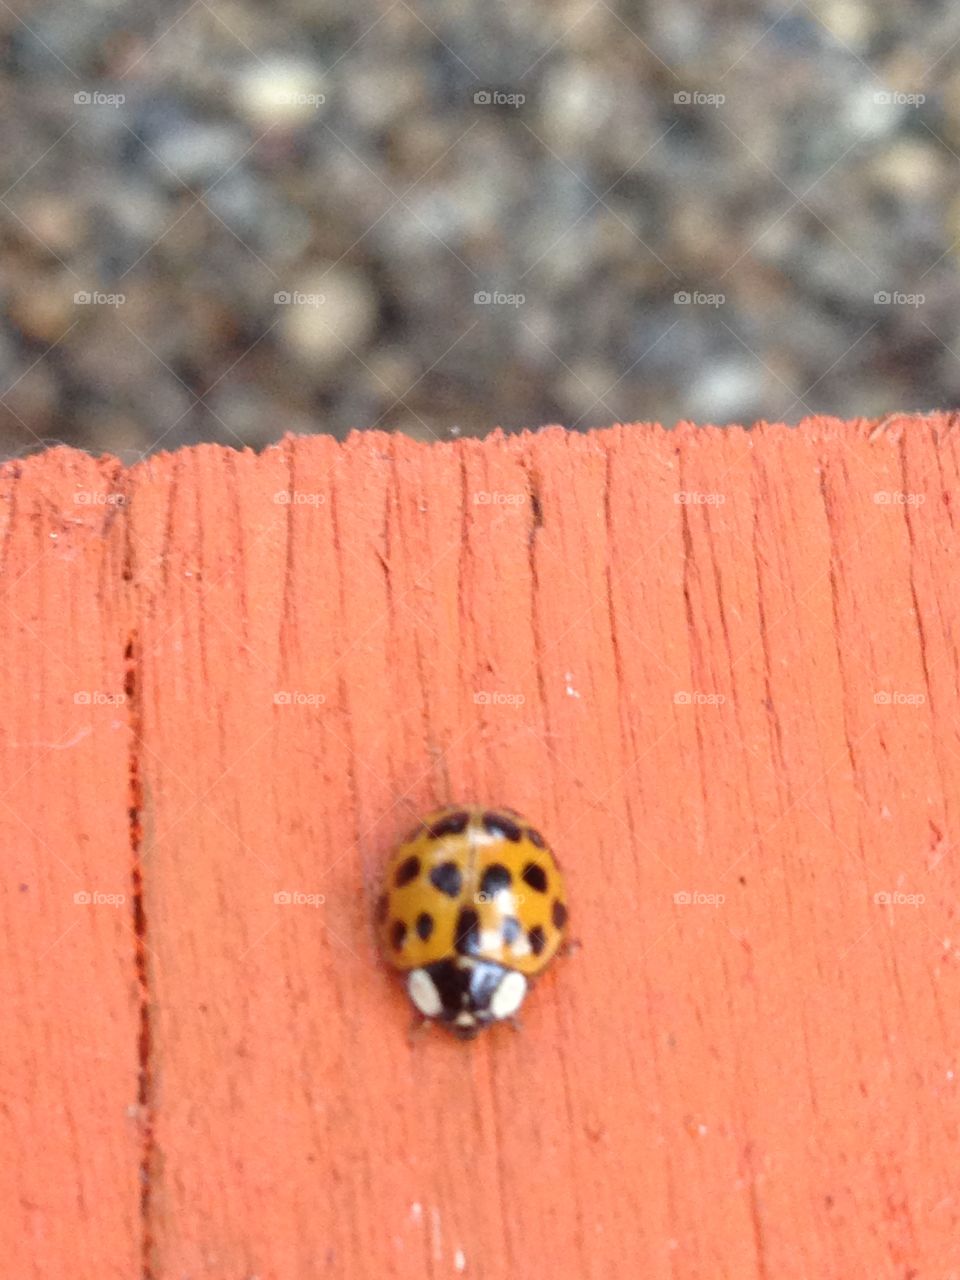 No Person, Ladybug, Little, Insect, Nature